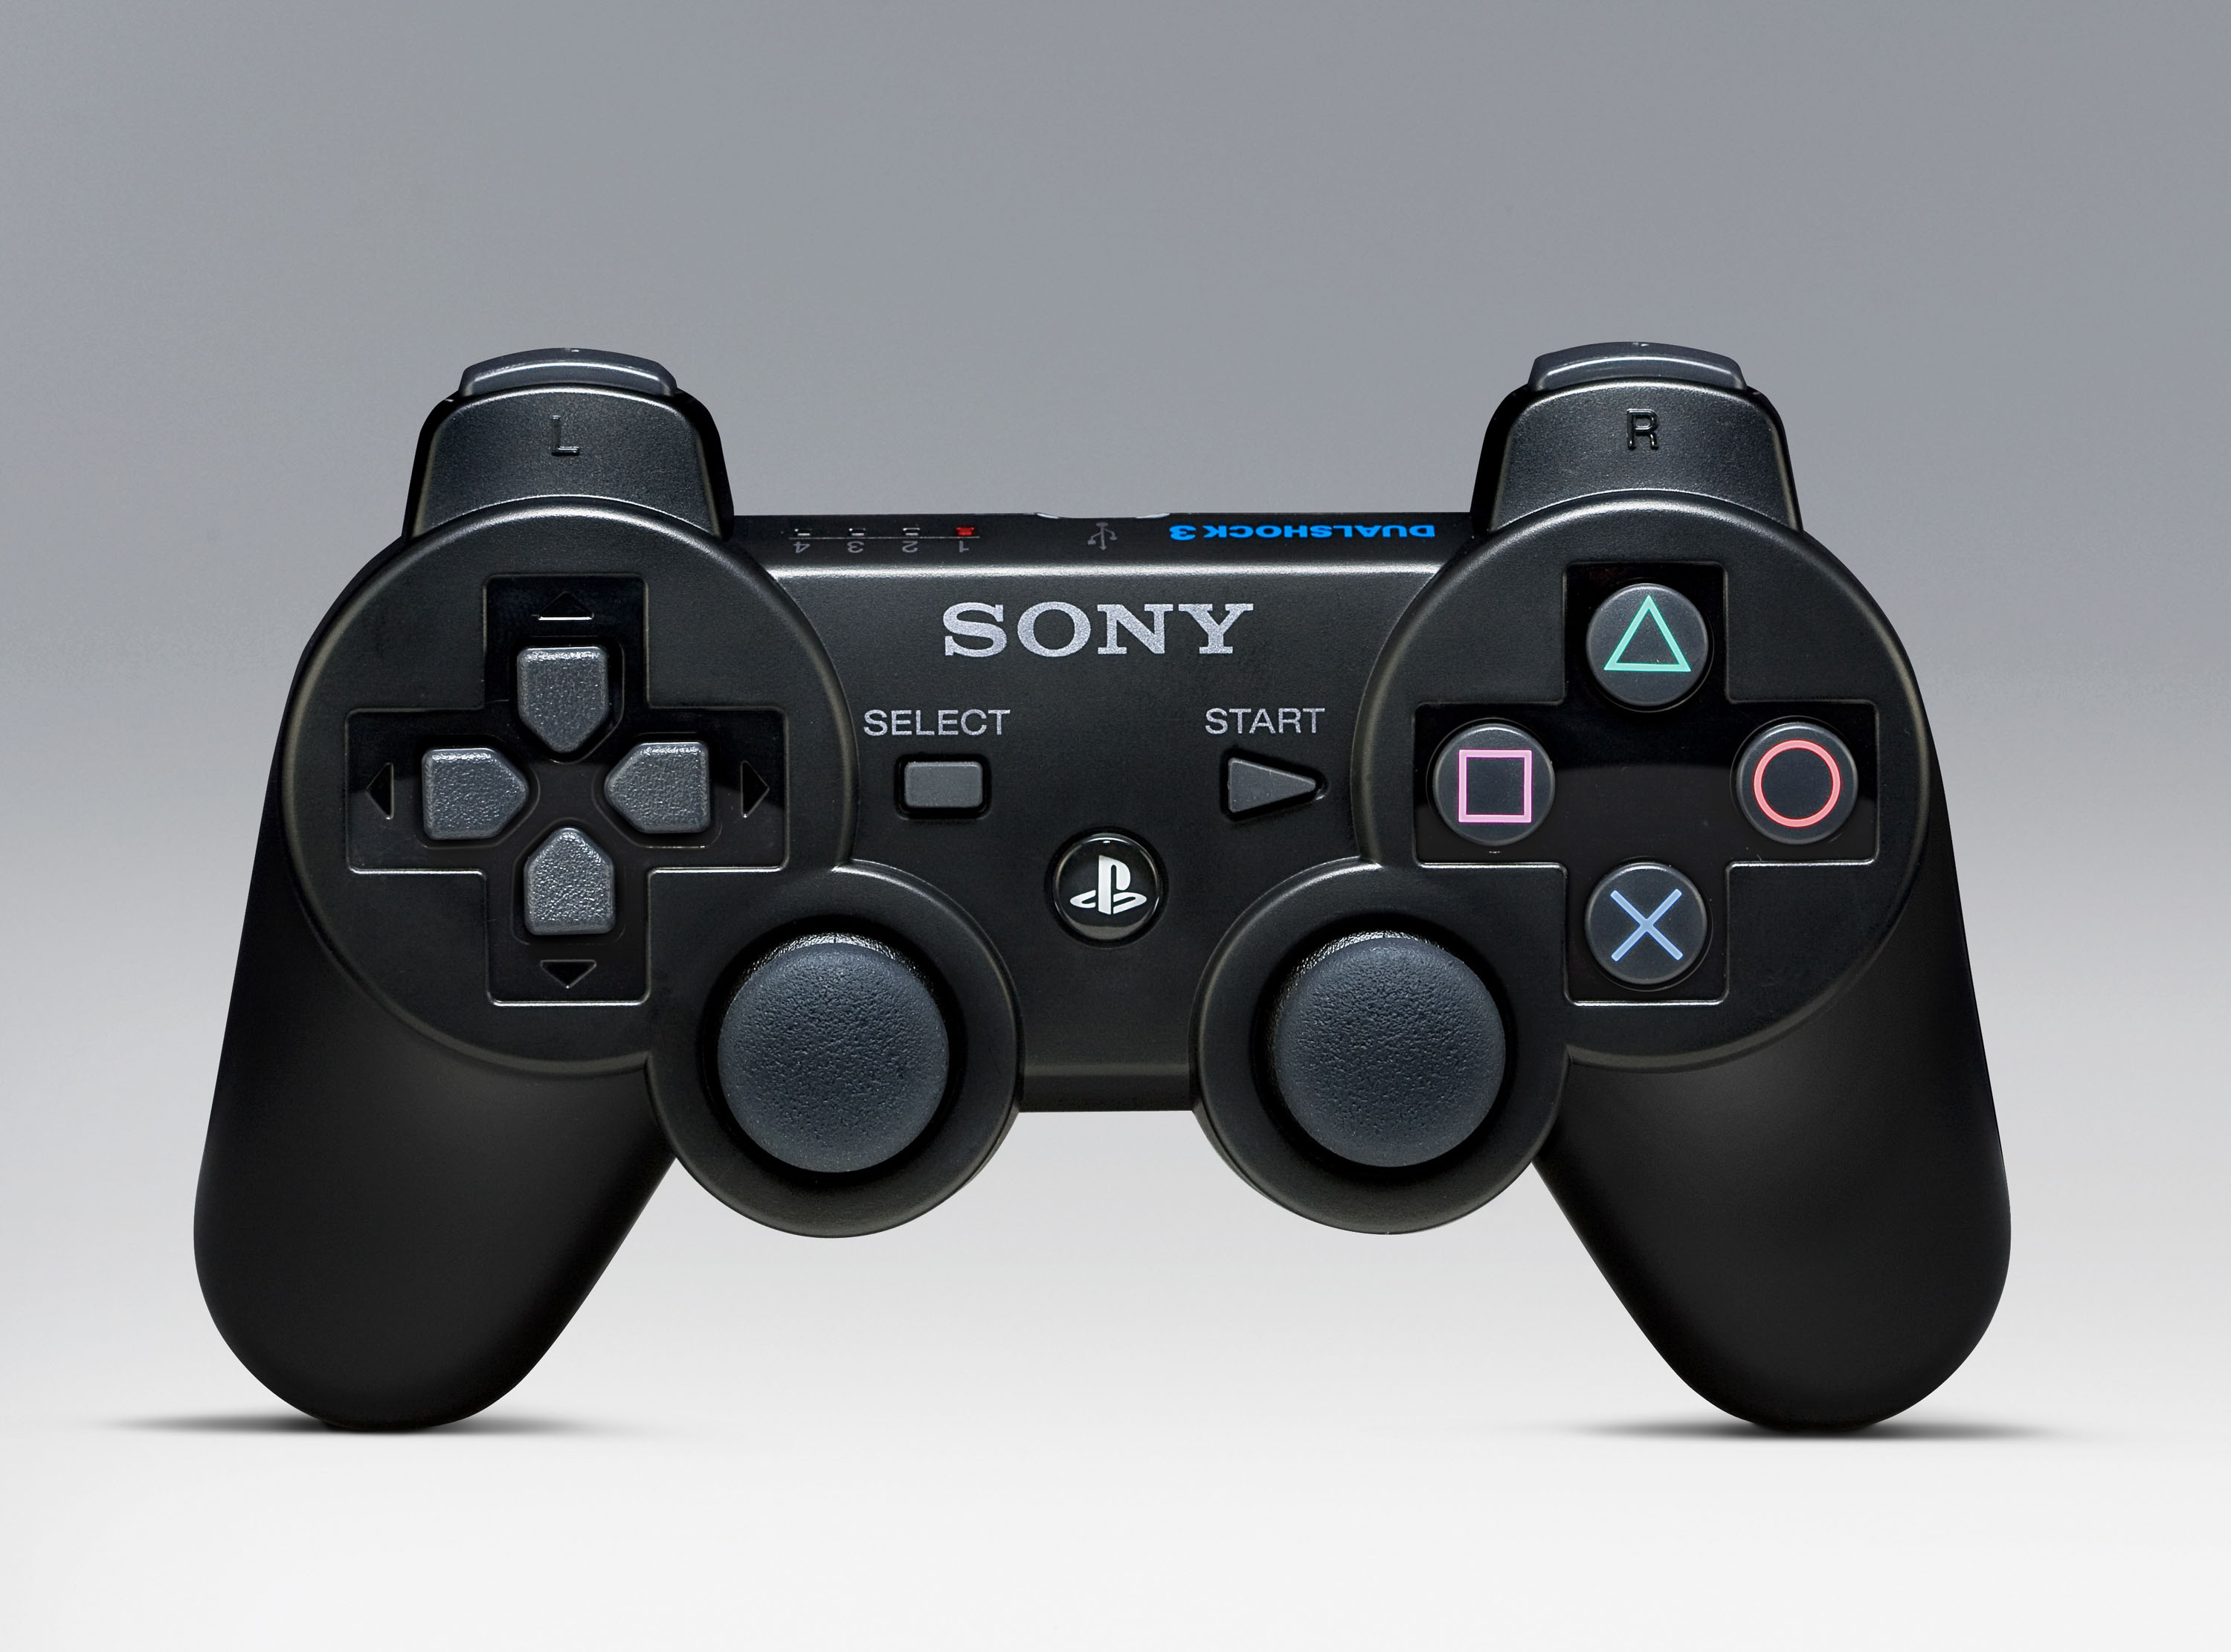 Sony PS4 UK Reviews in 2013